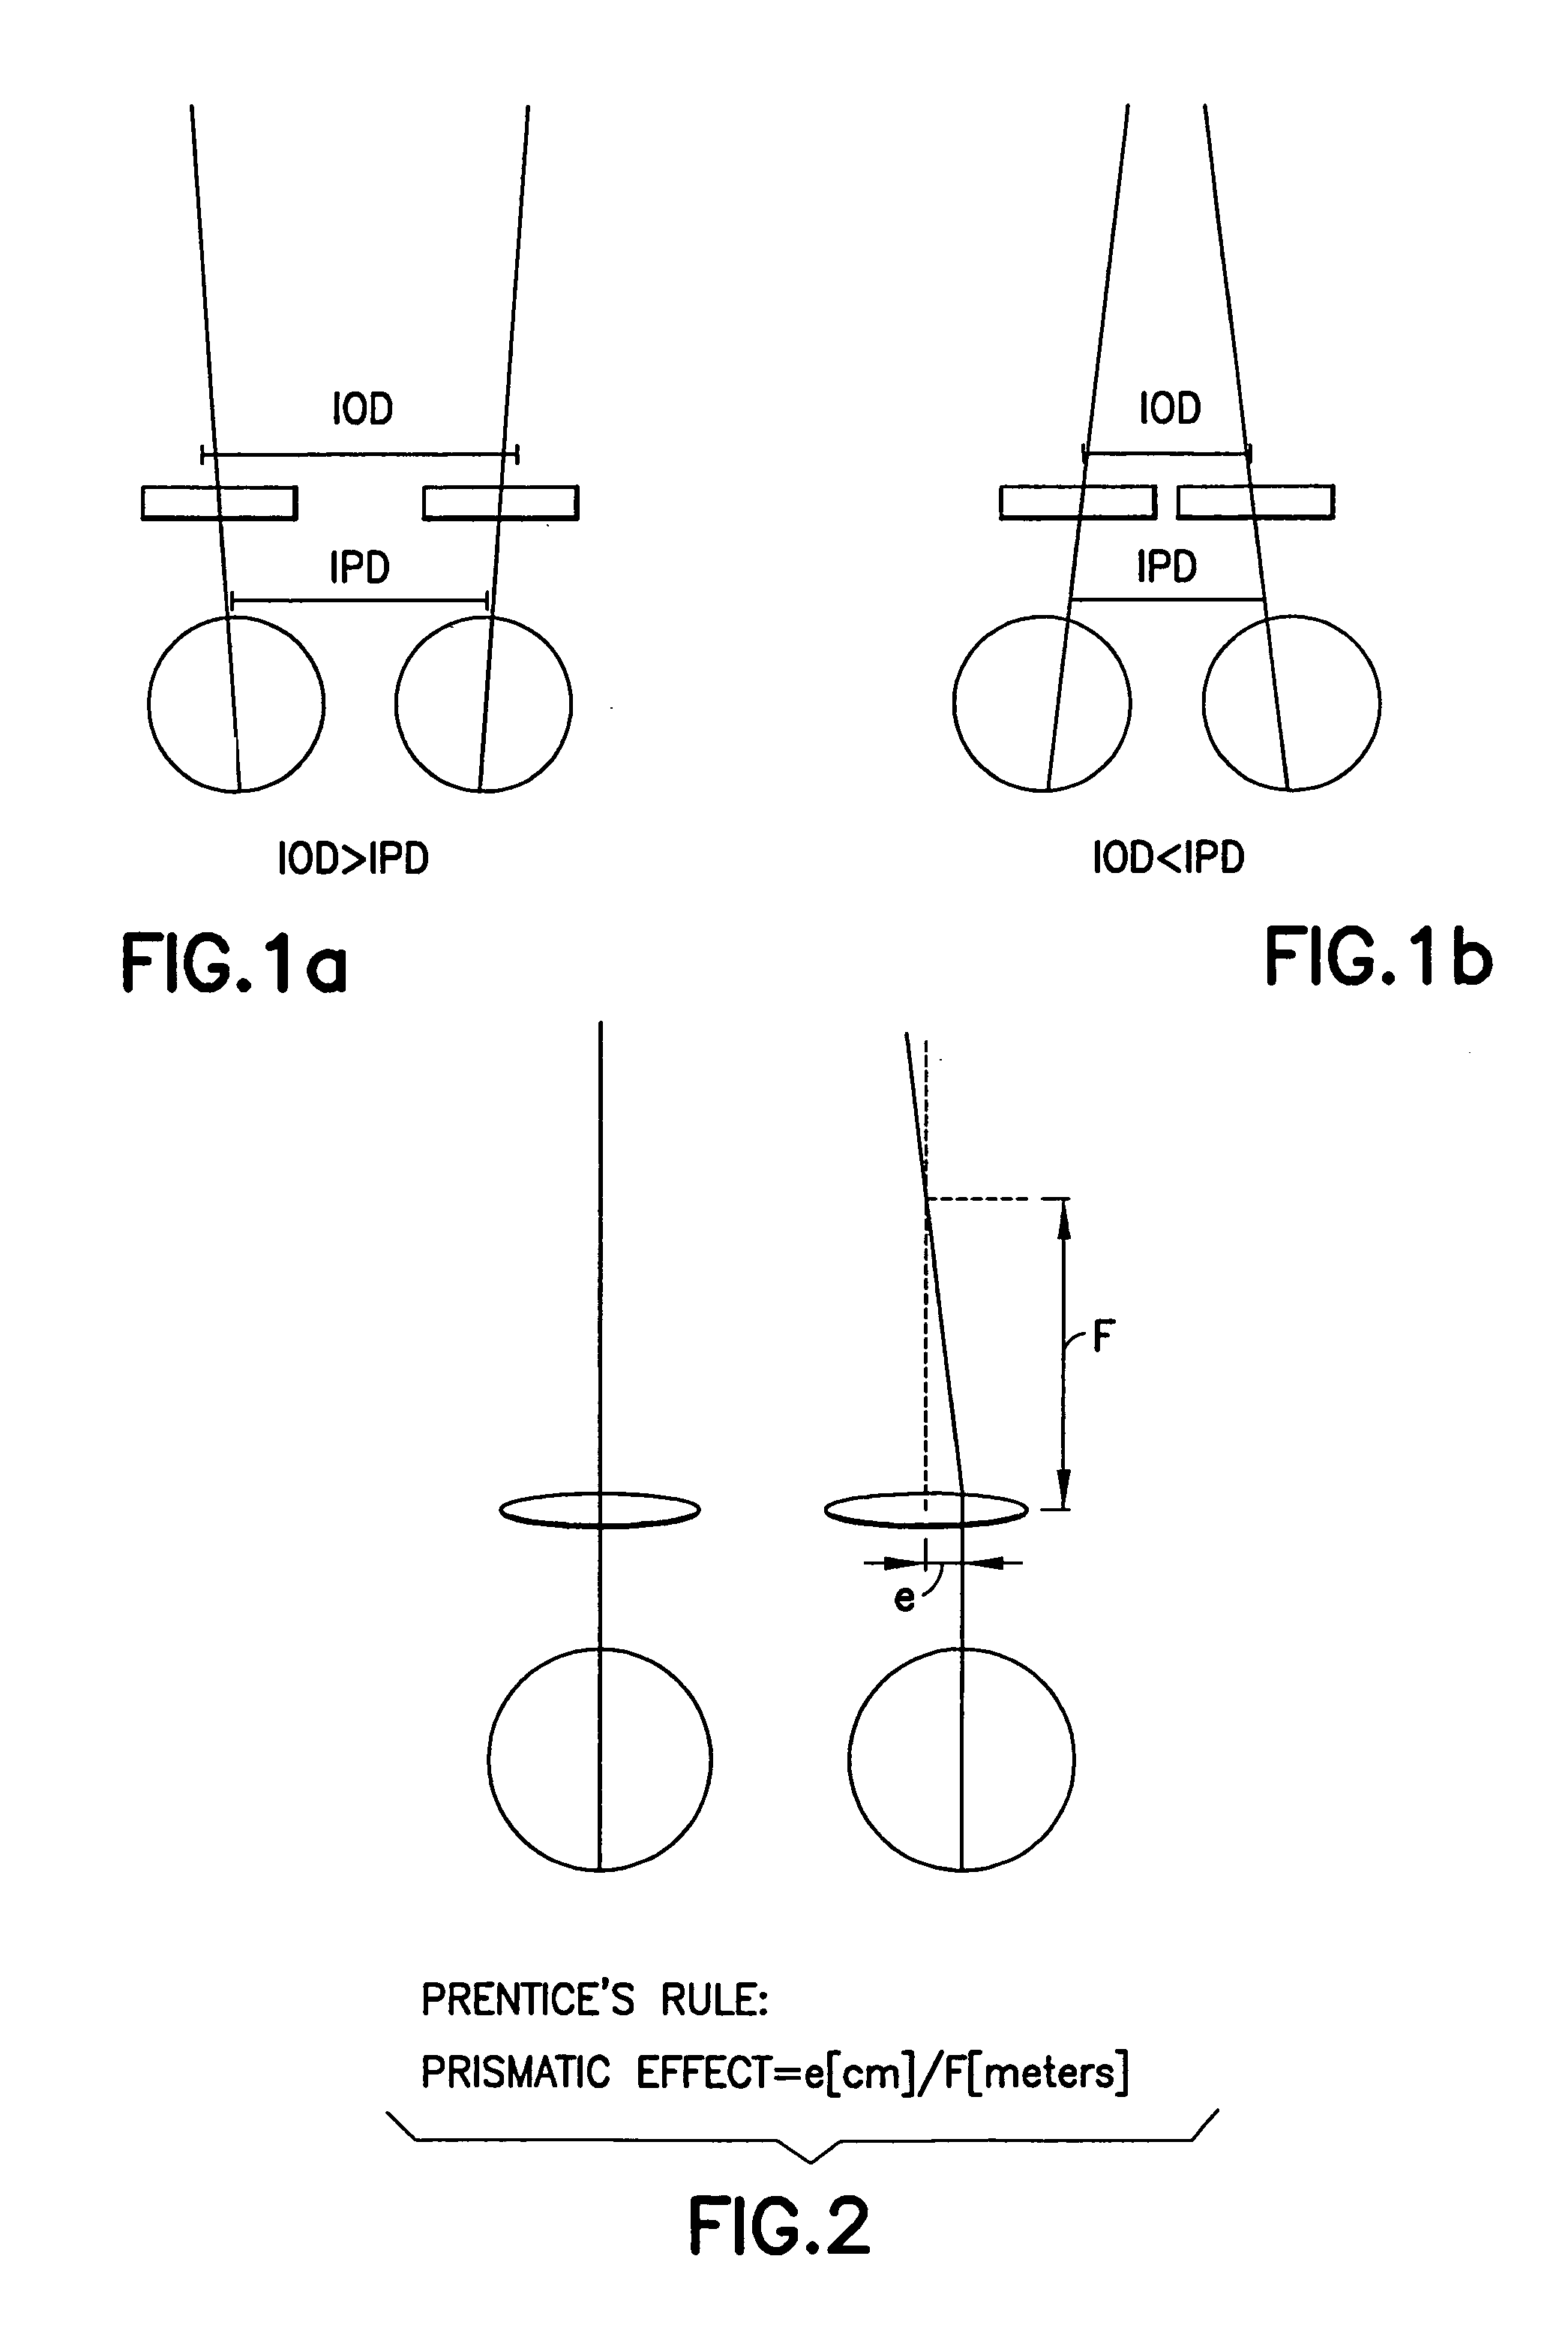 Method to detect misalignment and distortion in near-eye displays